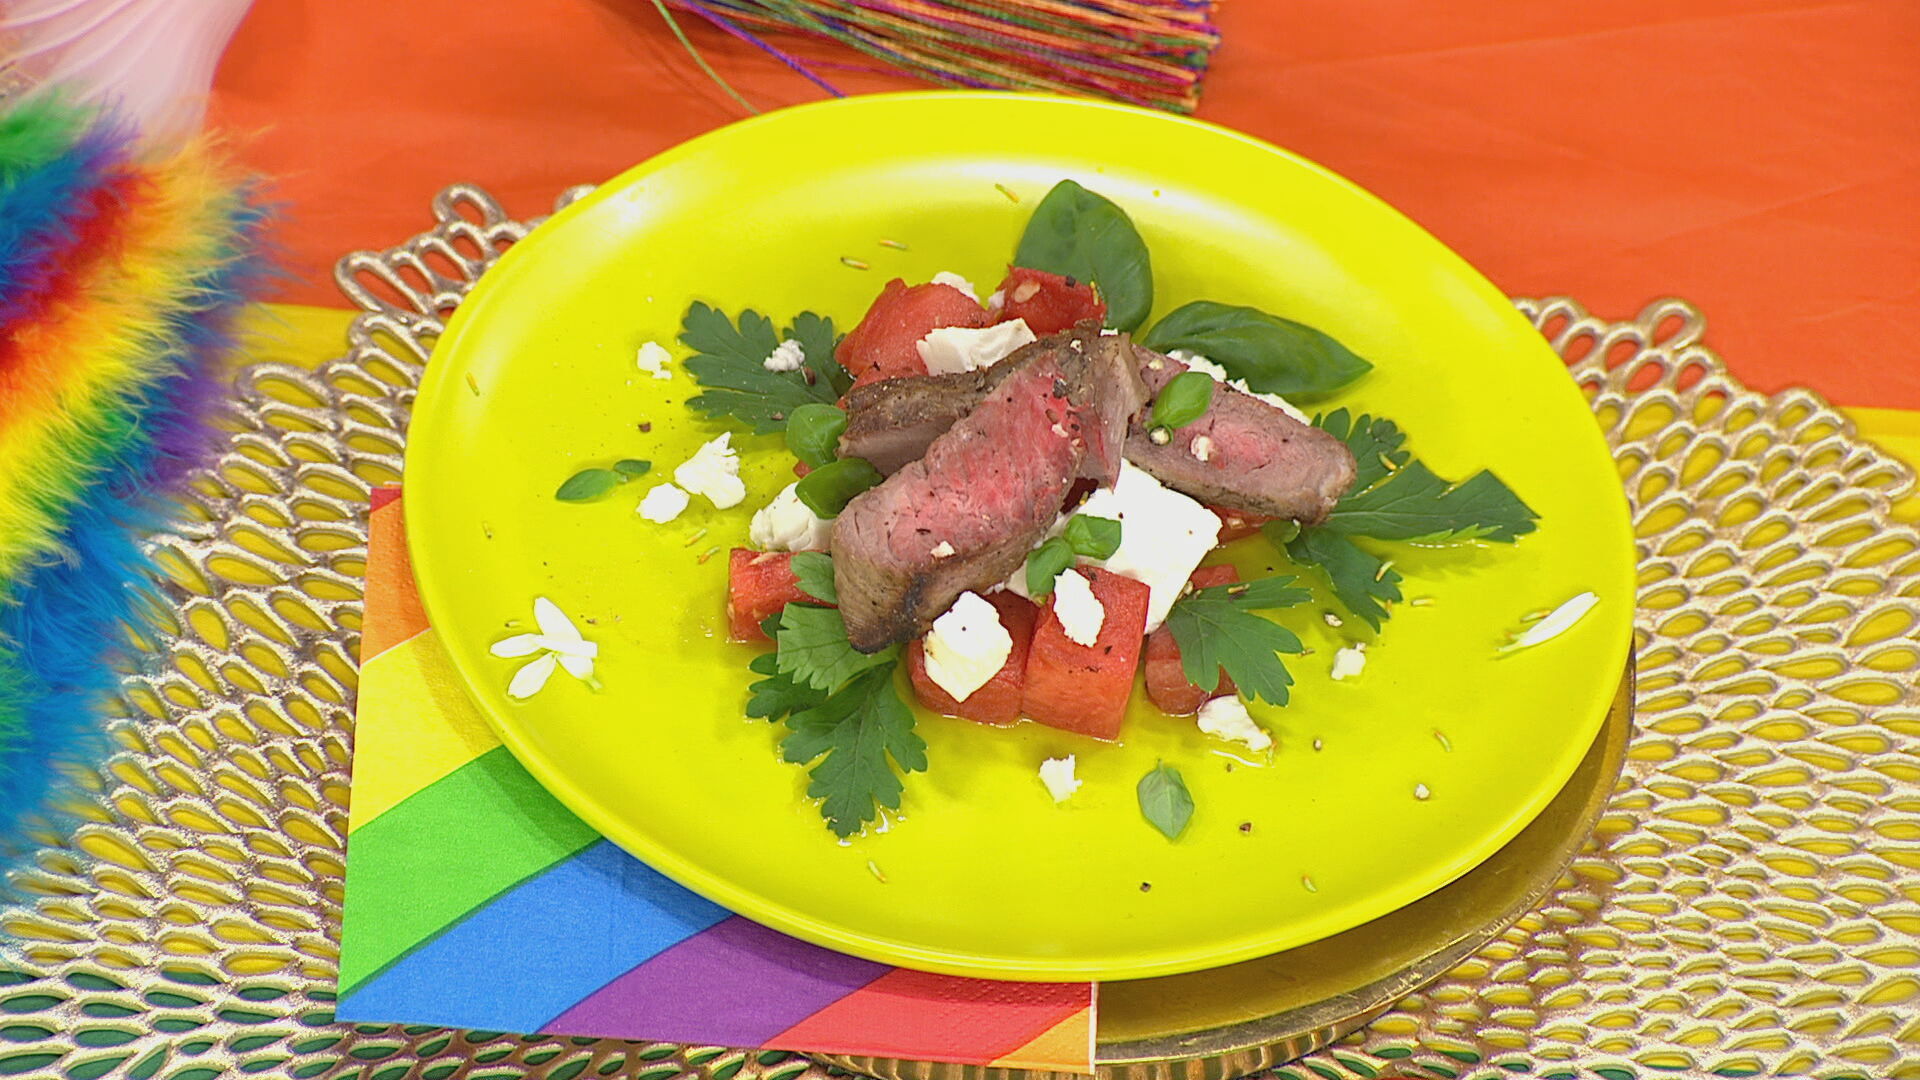 Grilled watermelon salad with lamb chops